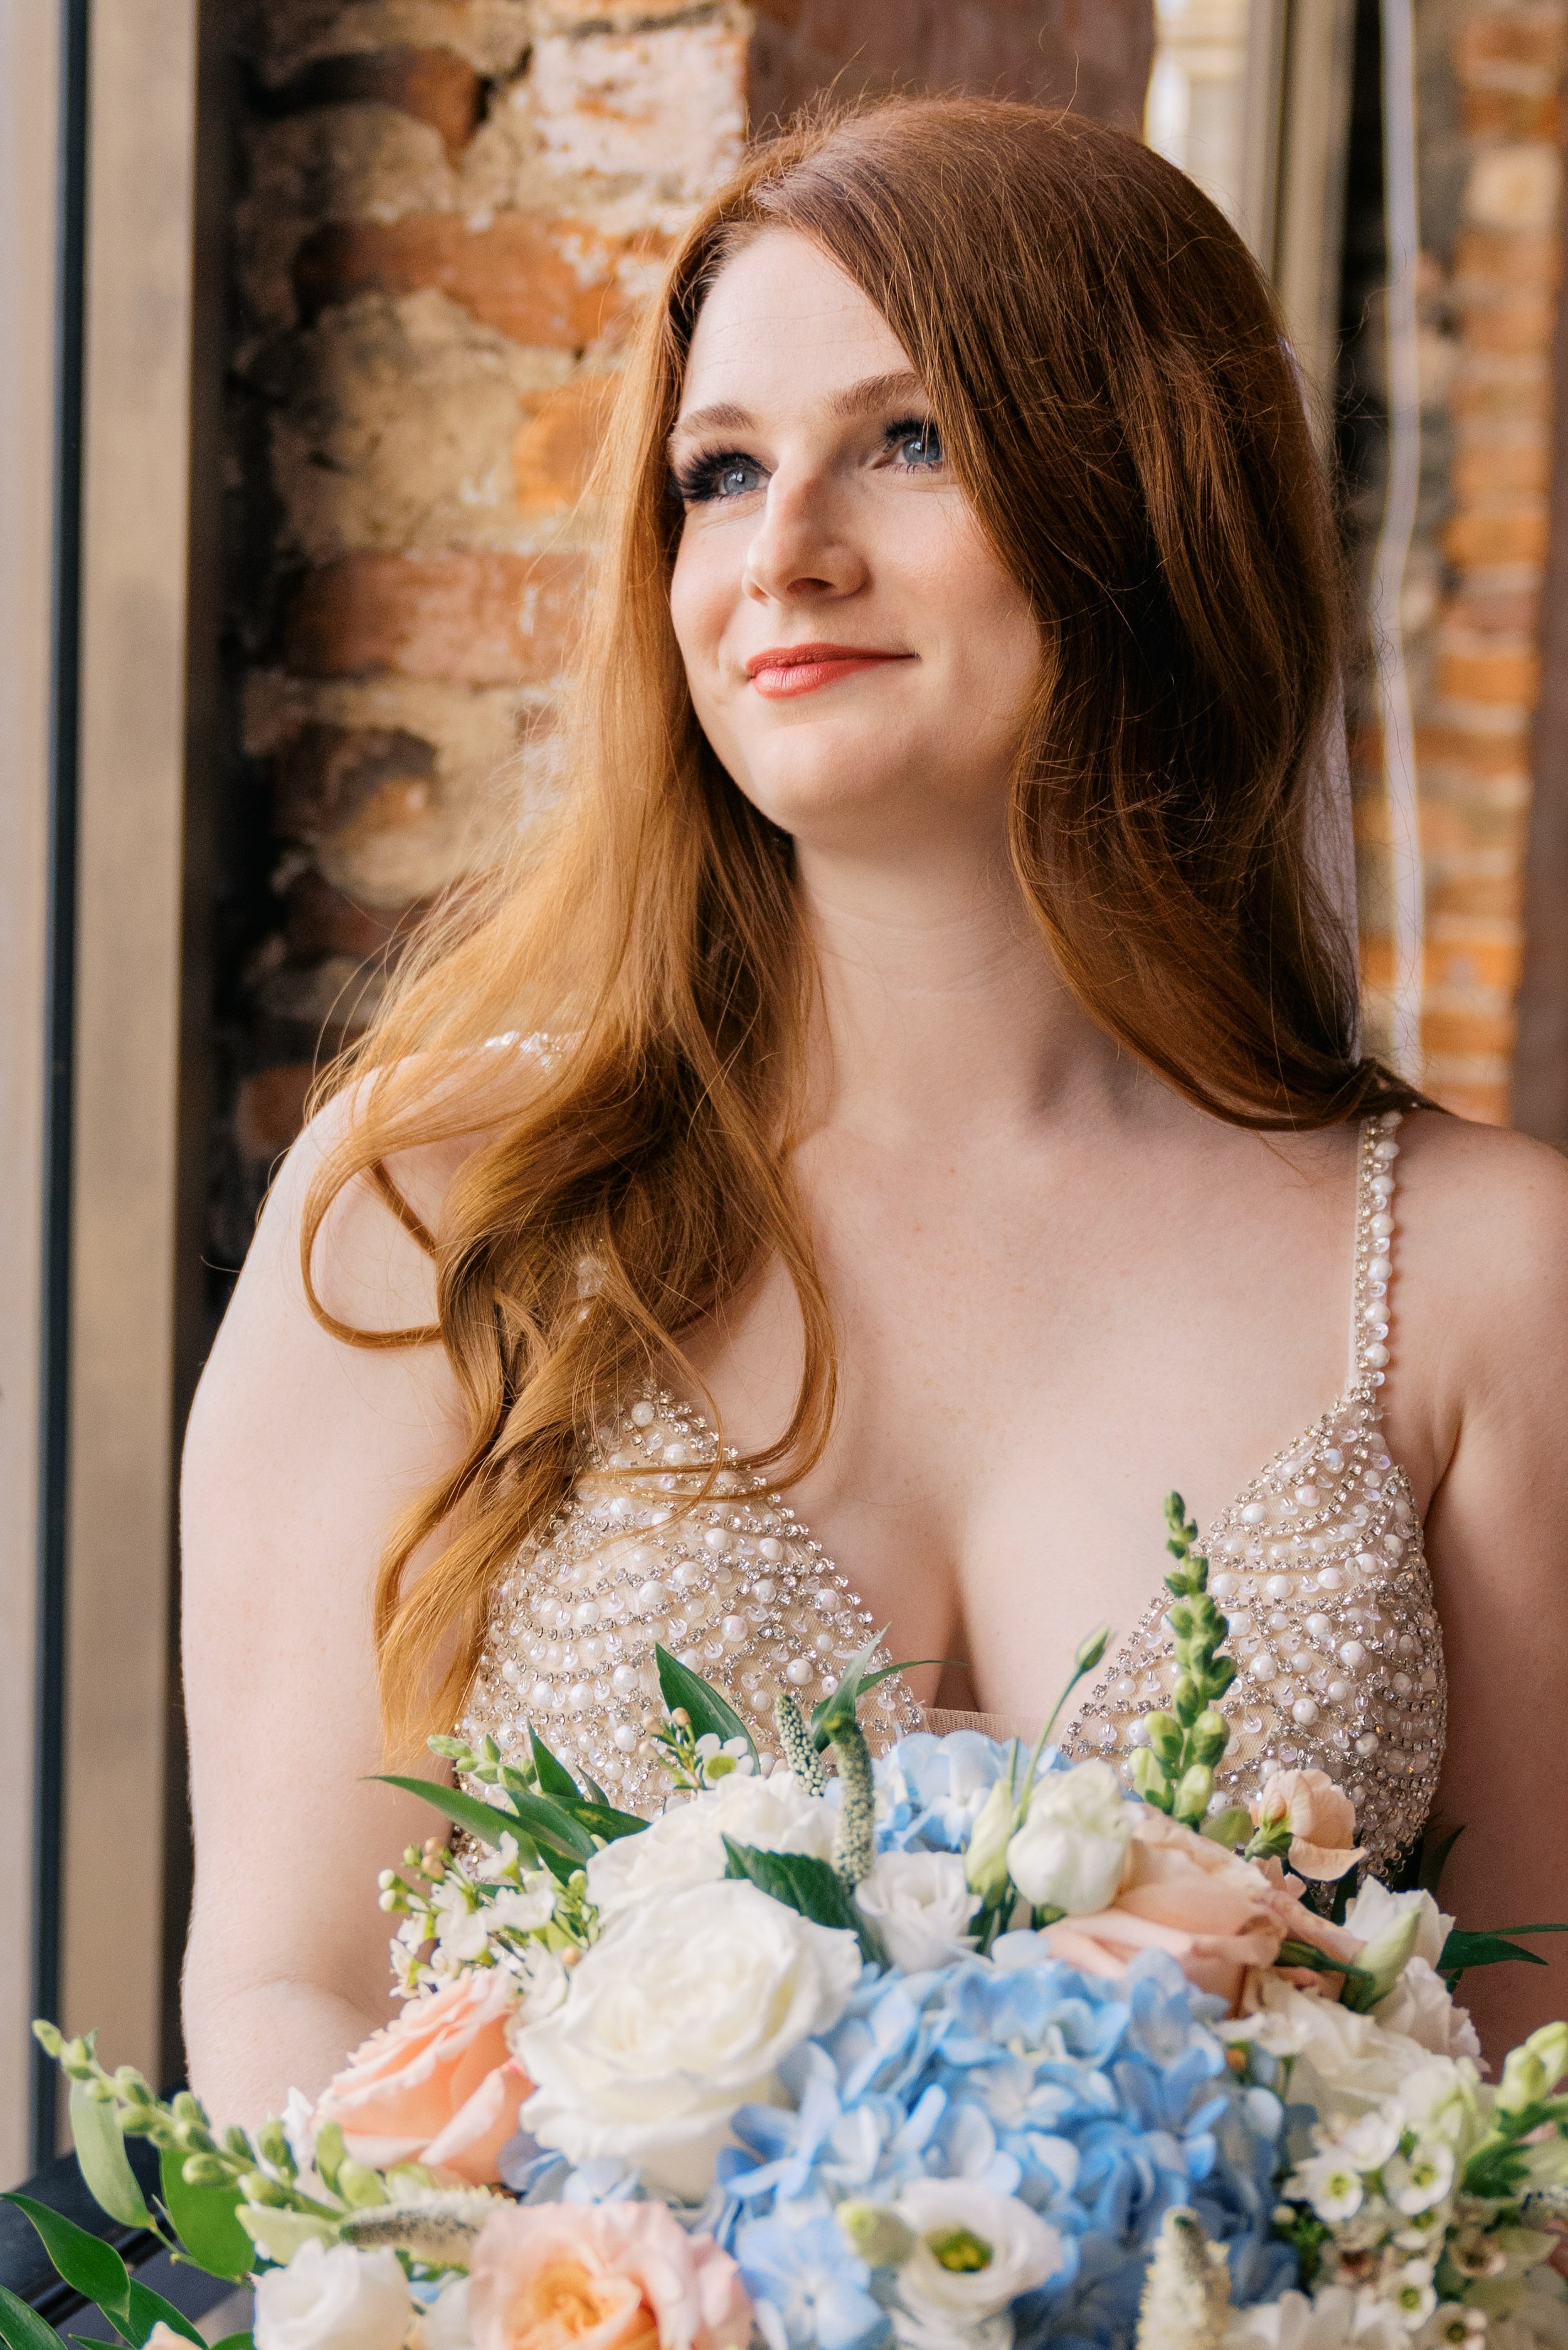 Bride with Bouquet of Flowers Salisbury North Carolina Wedding at The Meroney Theater Fancy This Photography